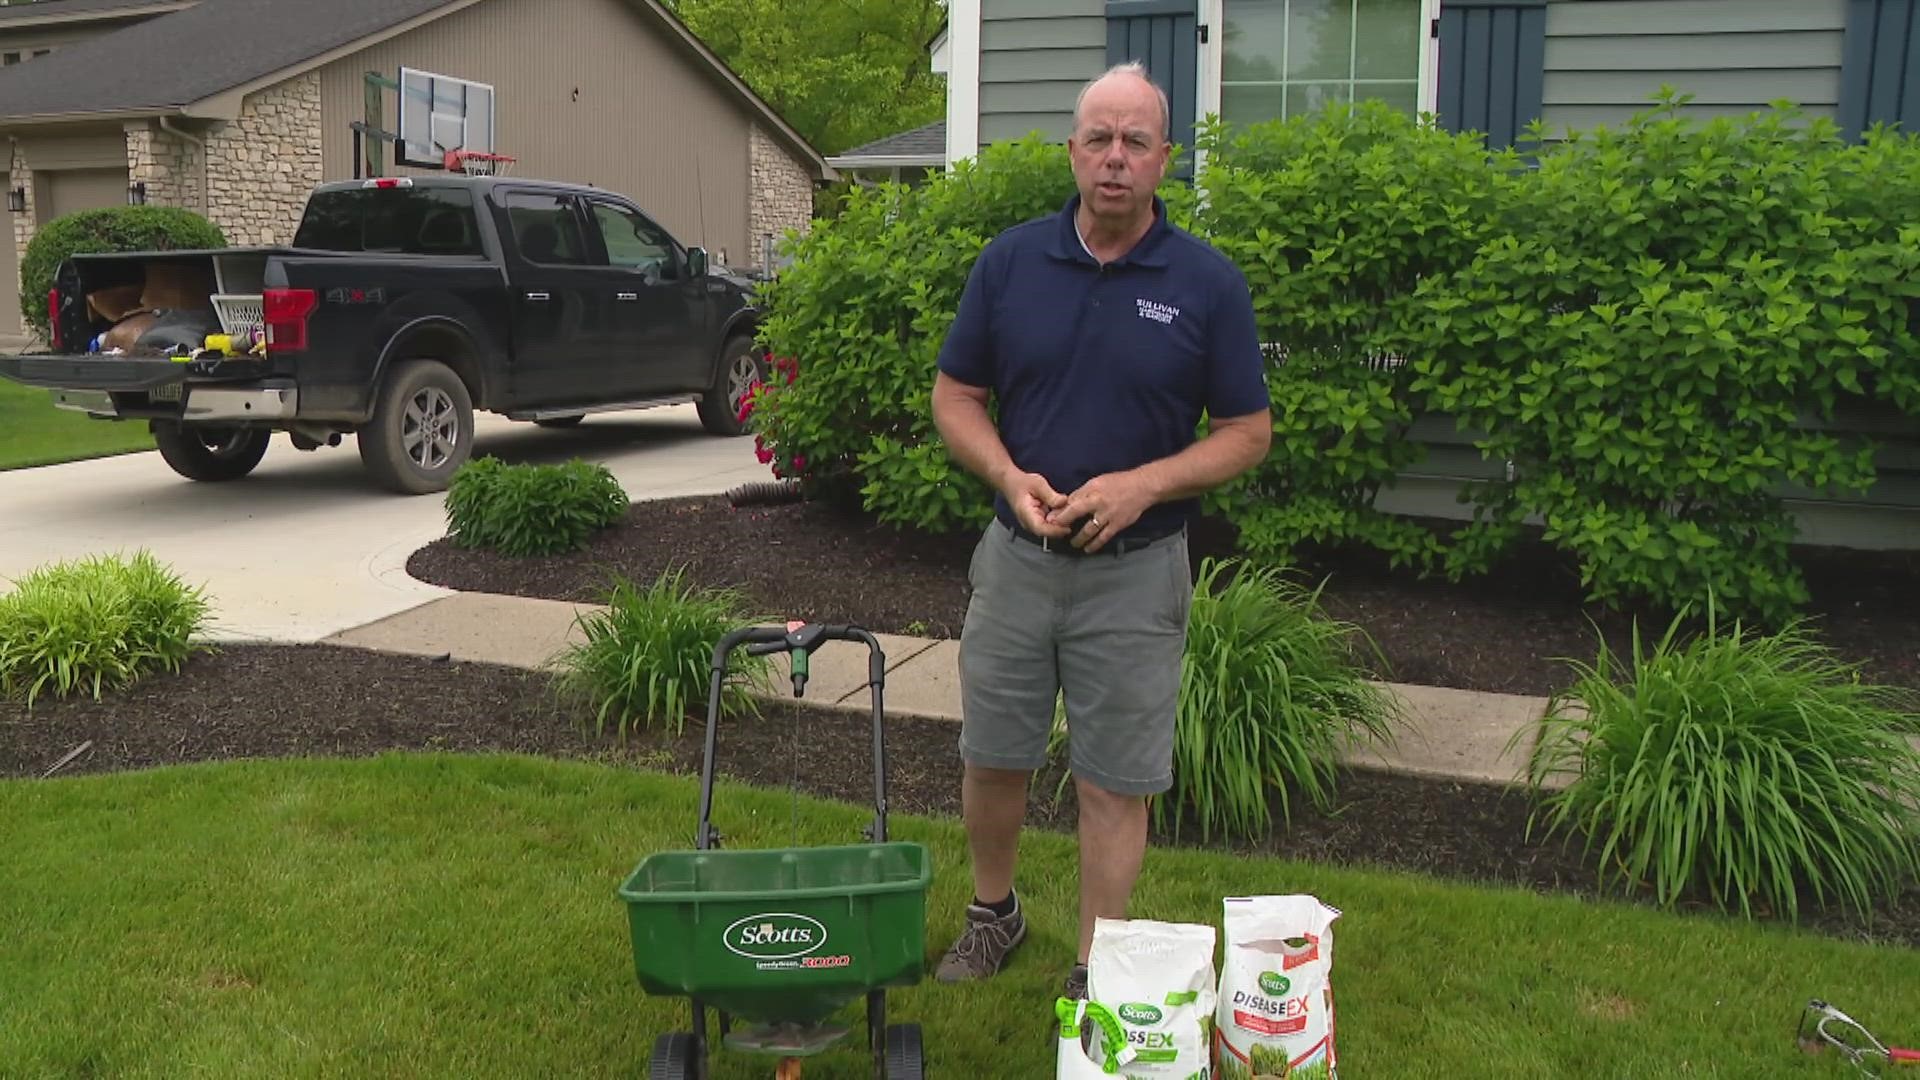 Pat Sullivan shows you how to get your home ready for spring from lawn care to taking care of your tomatoes.